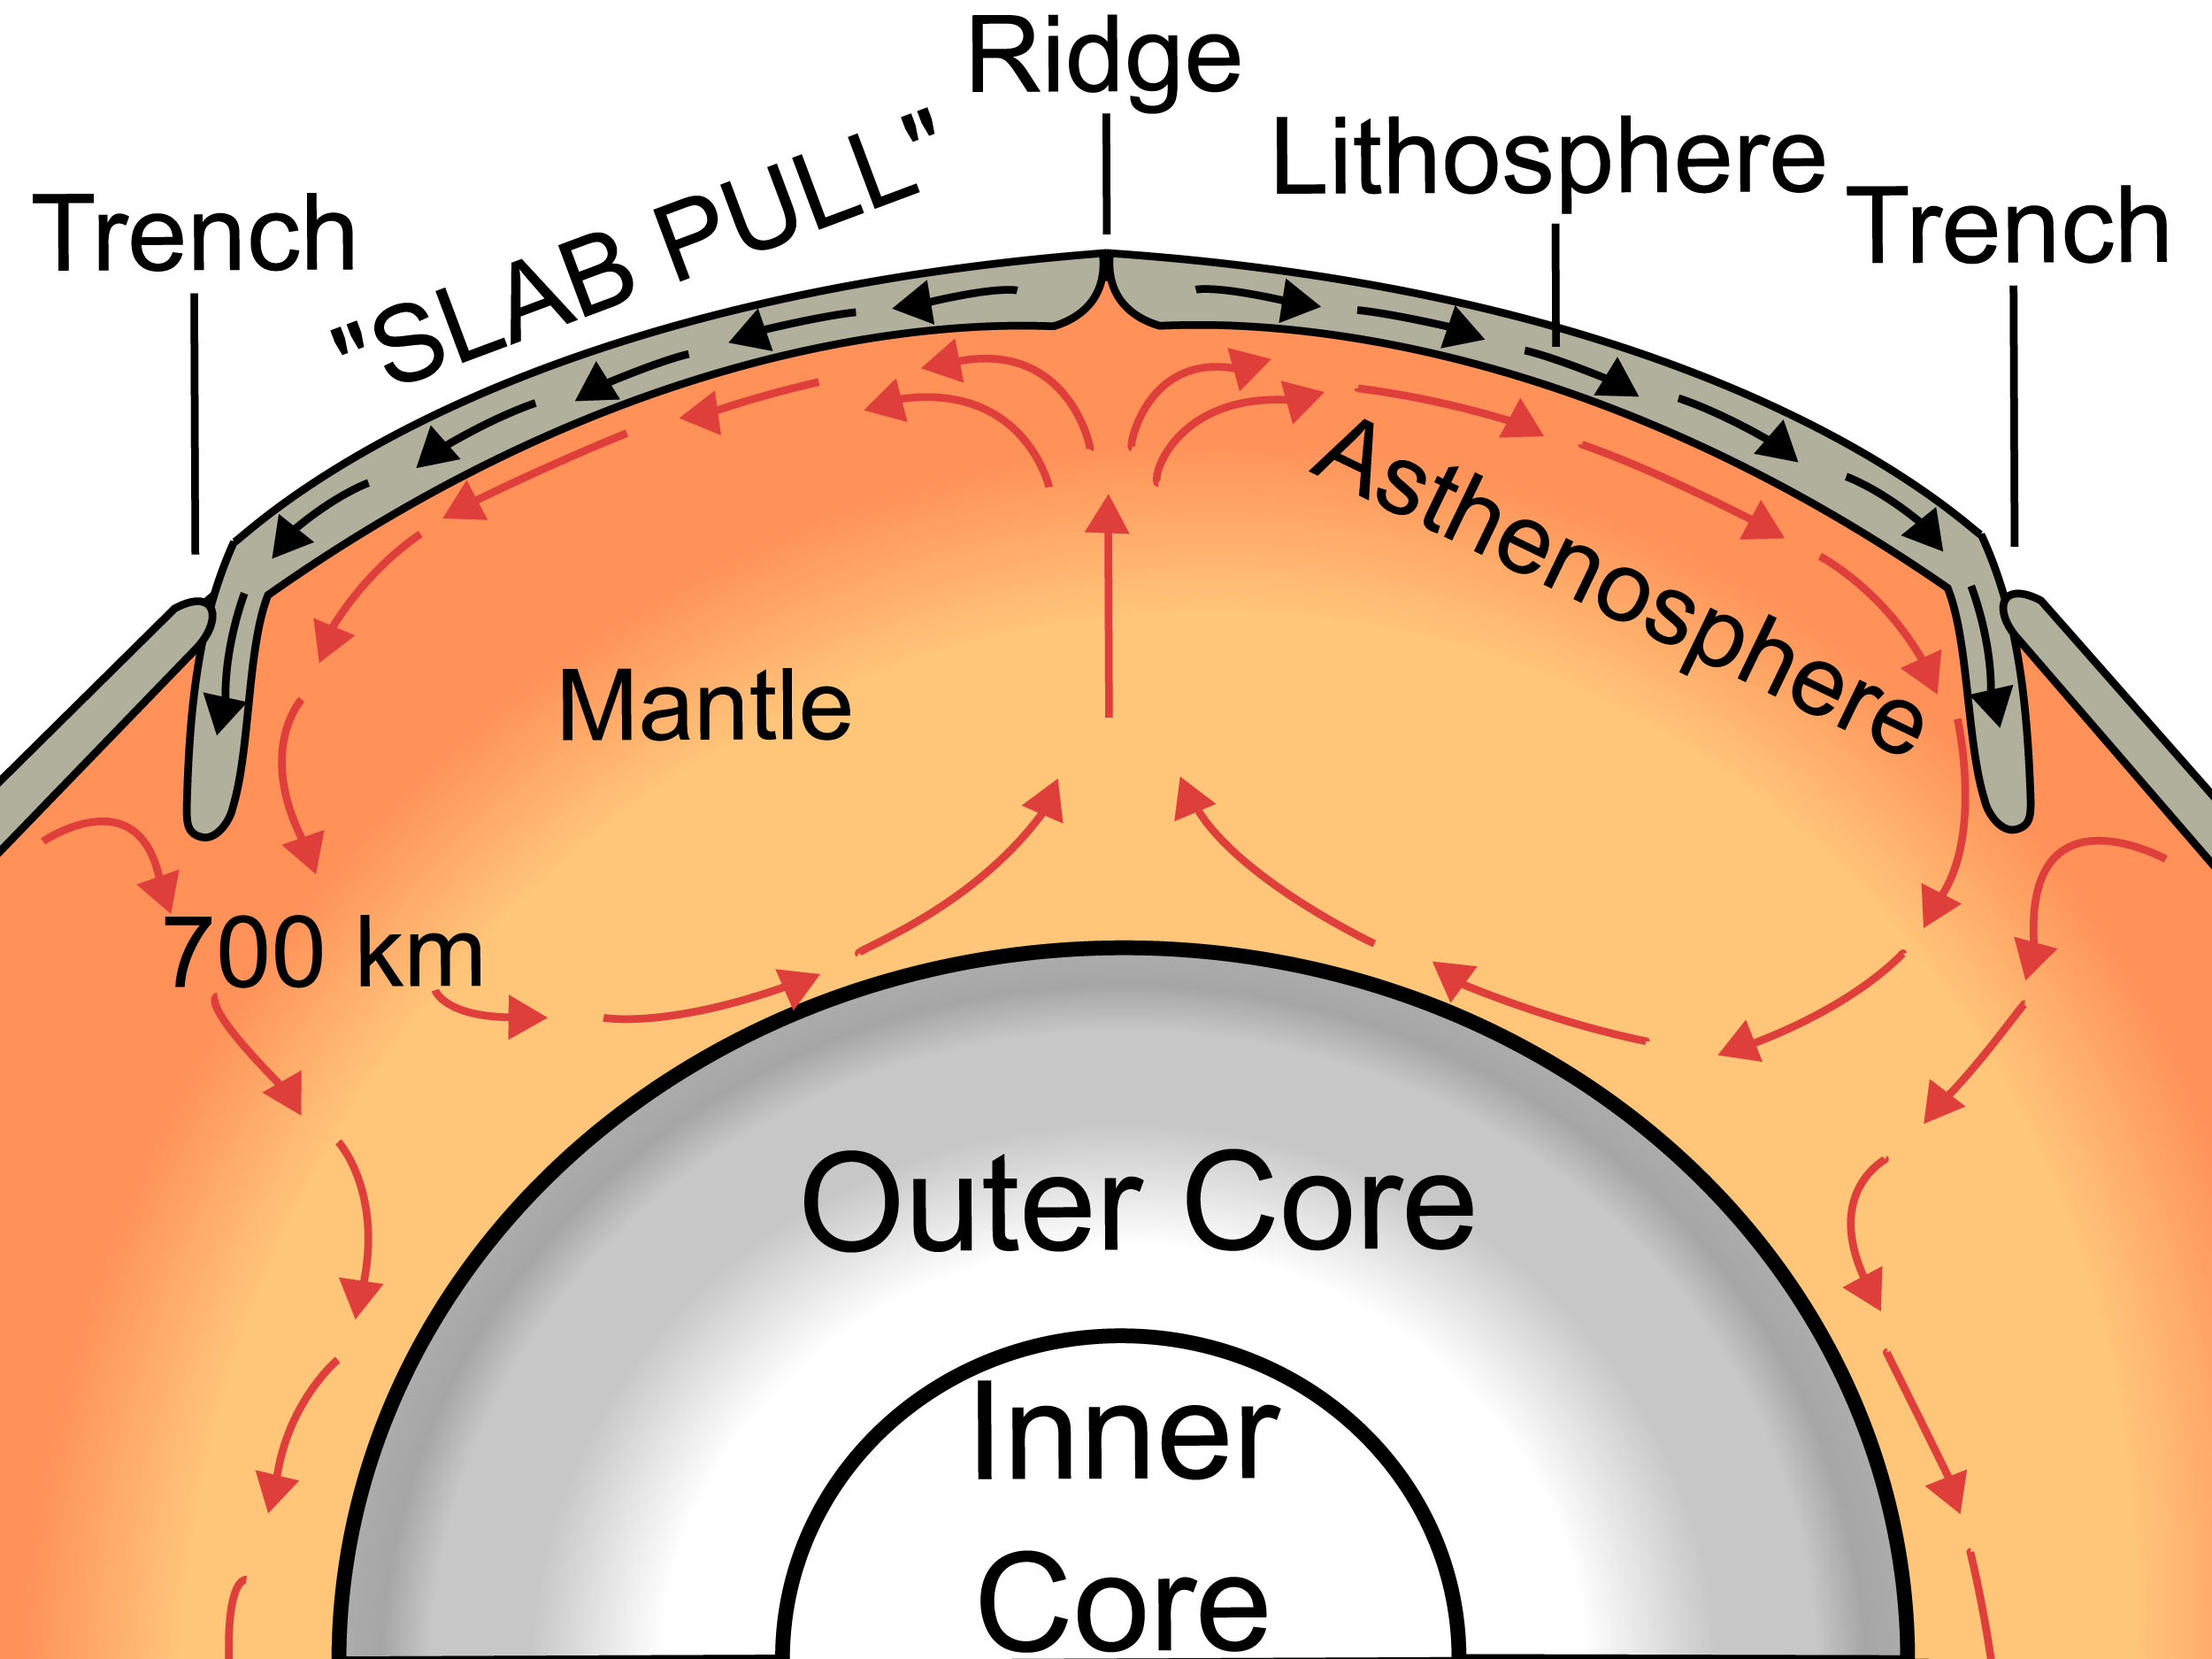 Convective forces in the mantle create a conveyor belt movement that drags the tectonic plates around. https://commons.wikimedia.org/wiki/File:Oceanic_spreading.svg